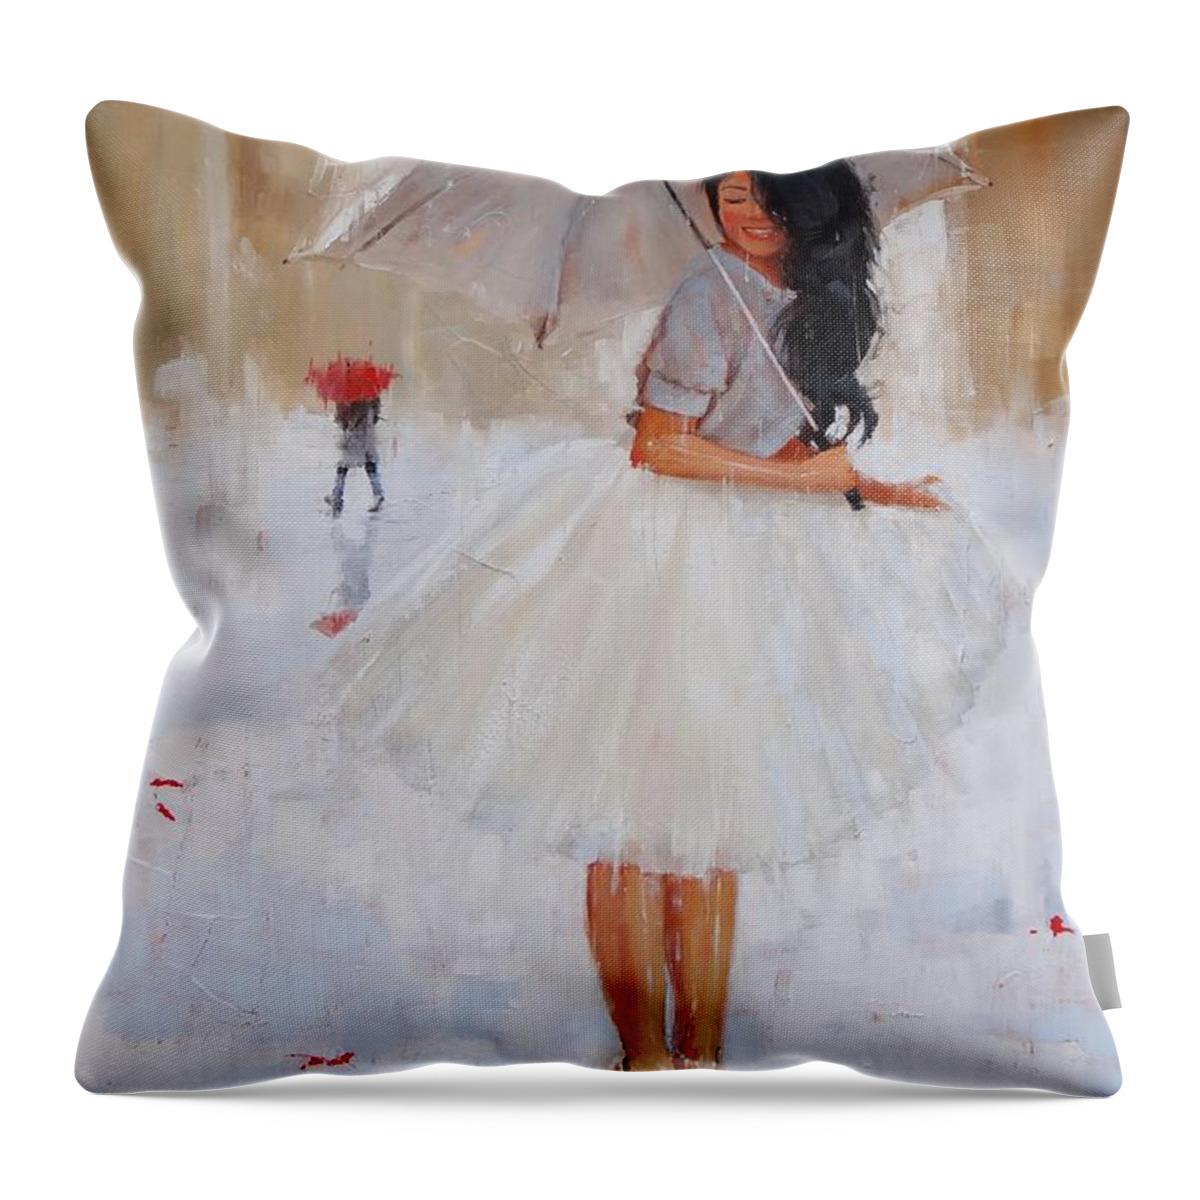 Umbrella Throw Pillow featuring the painting Another Splash by Laura Lee Zanghetti